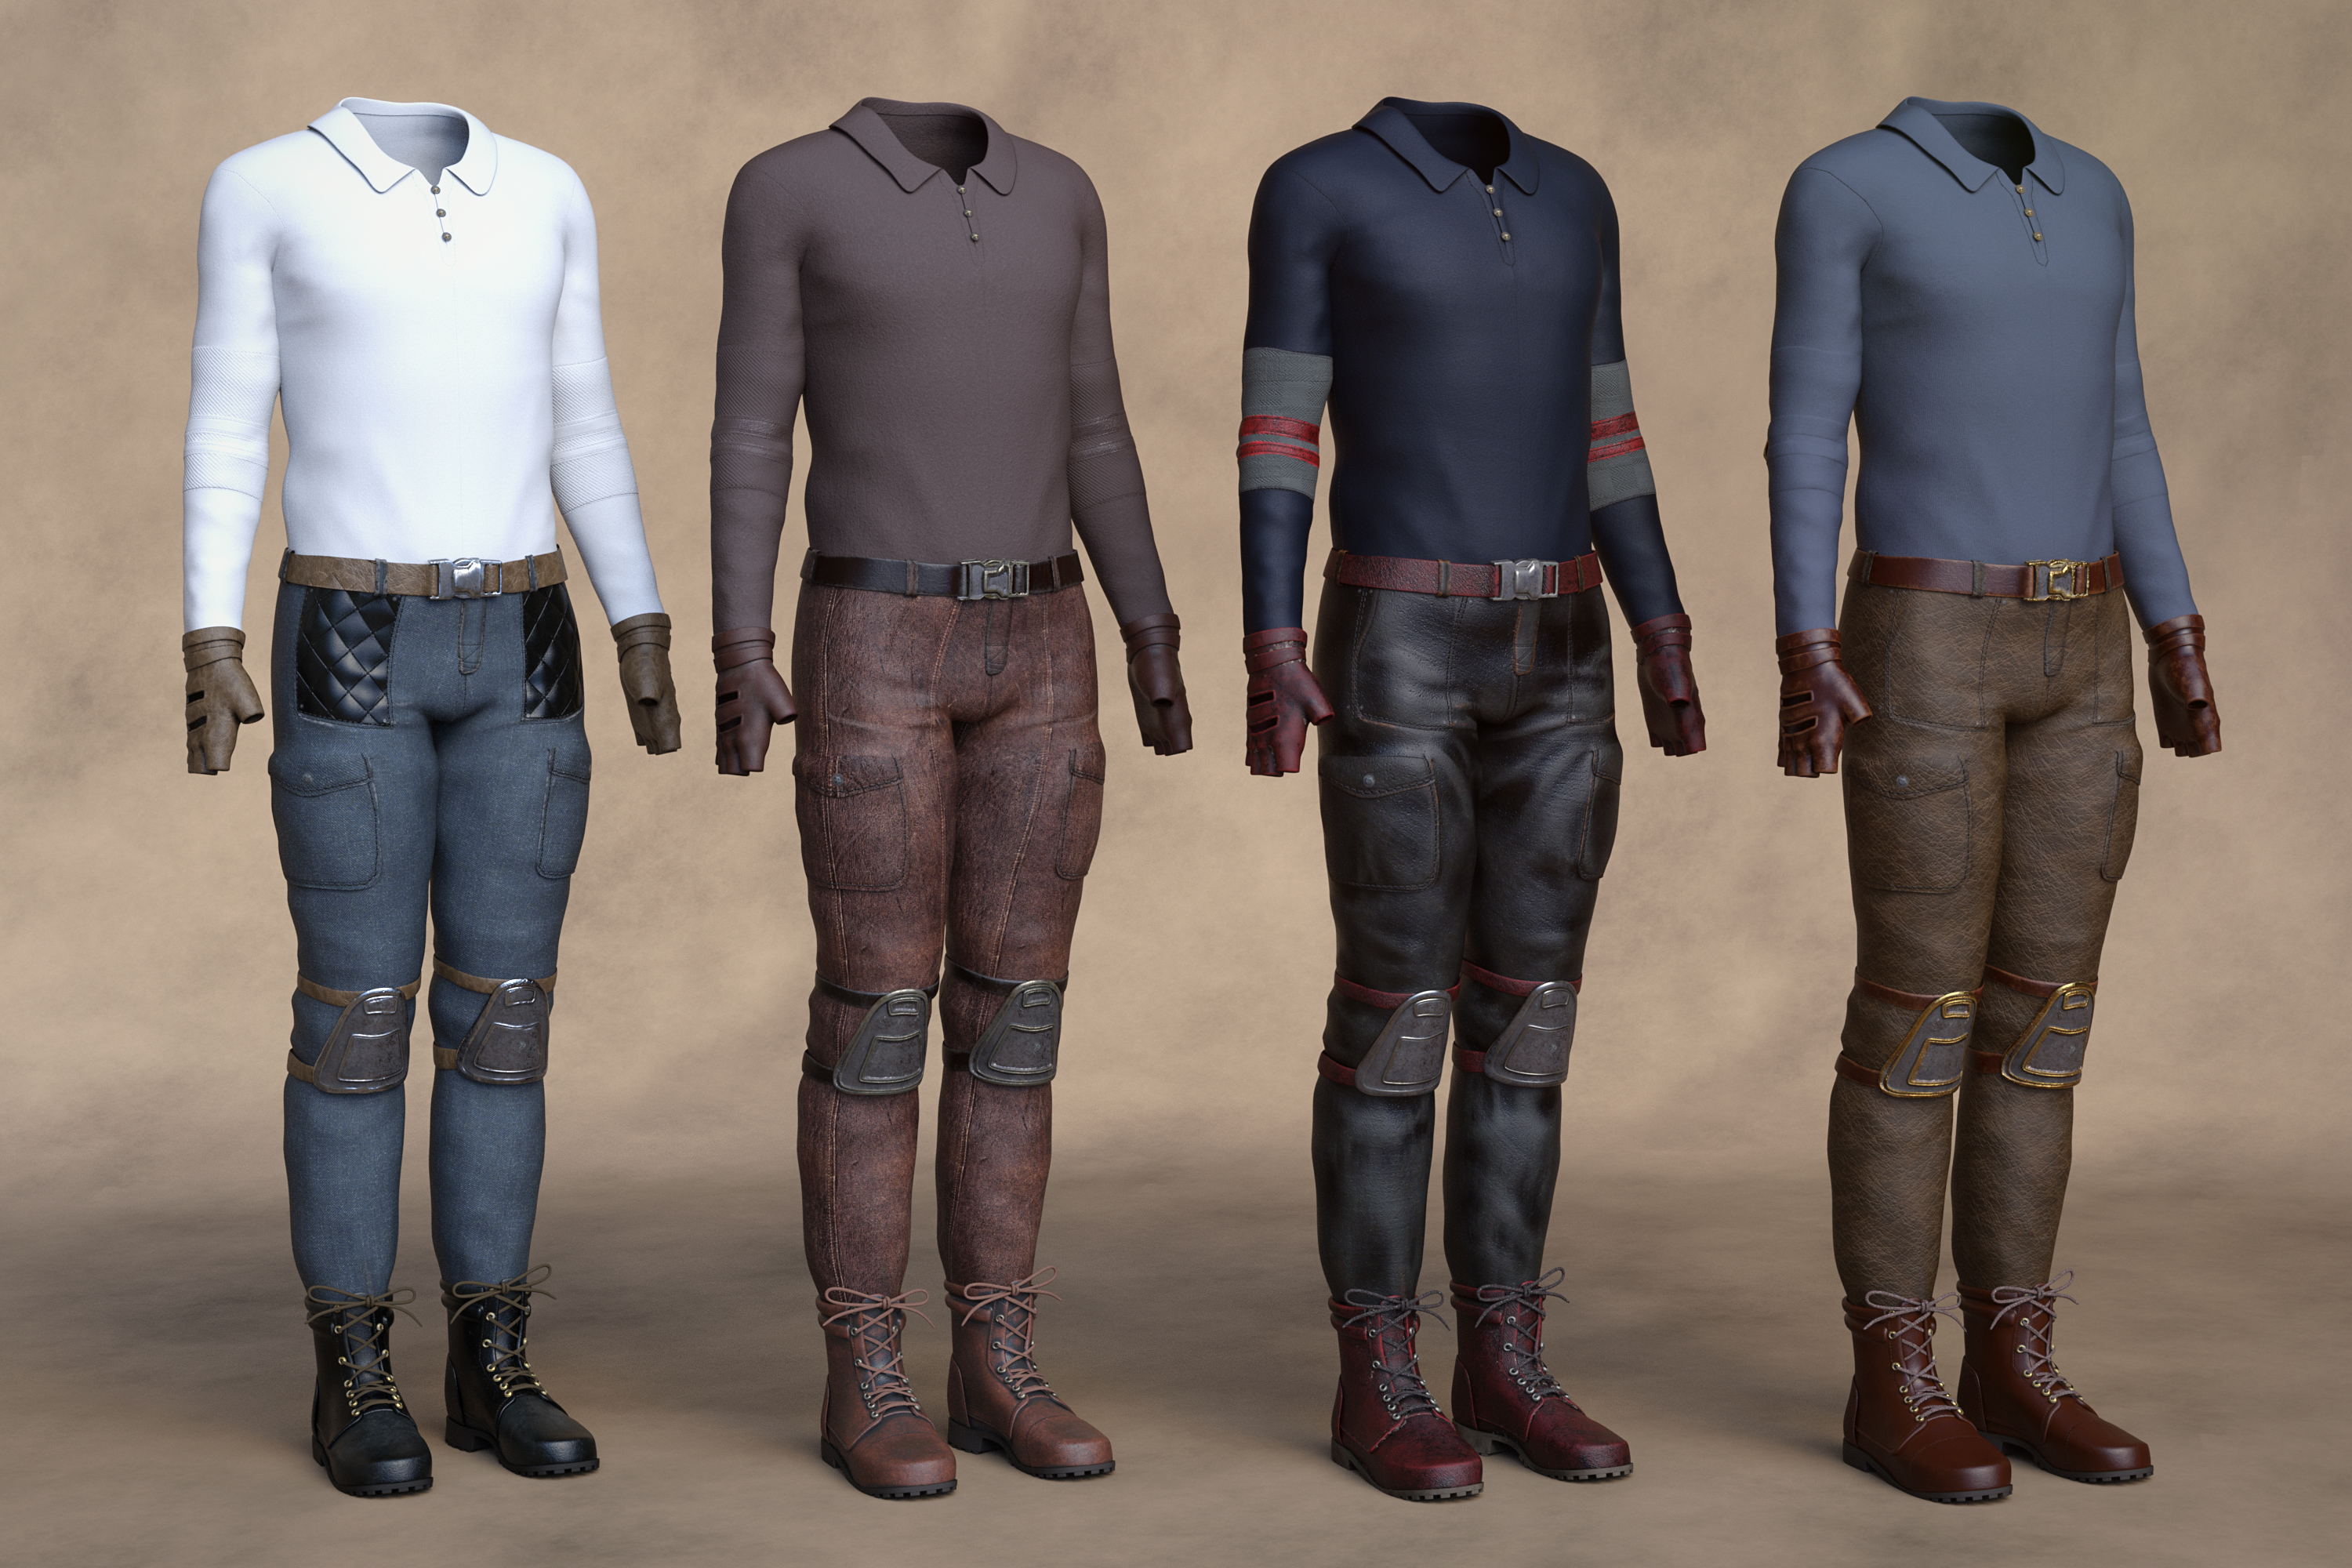 Alpha Team Outfit Textures by: Moonscape GraphicsSade, 3D Models by Daz 3D